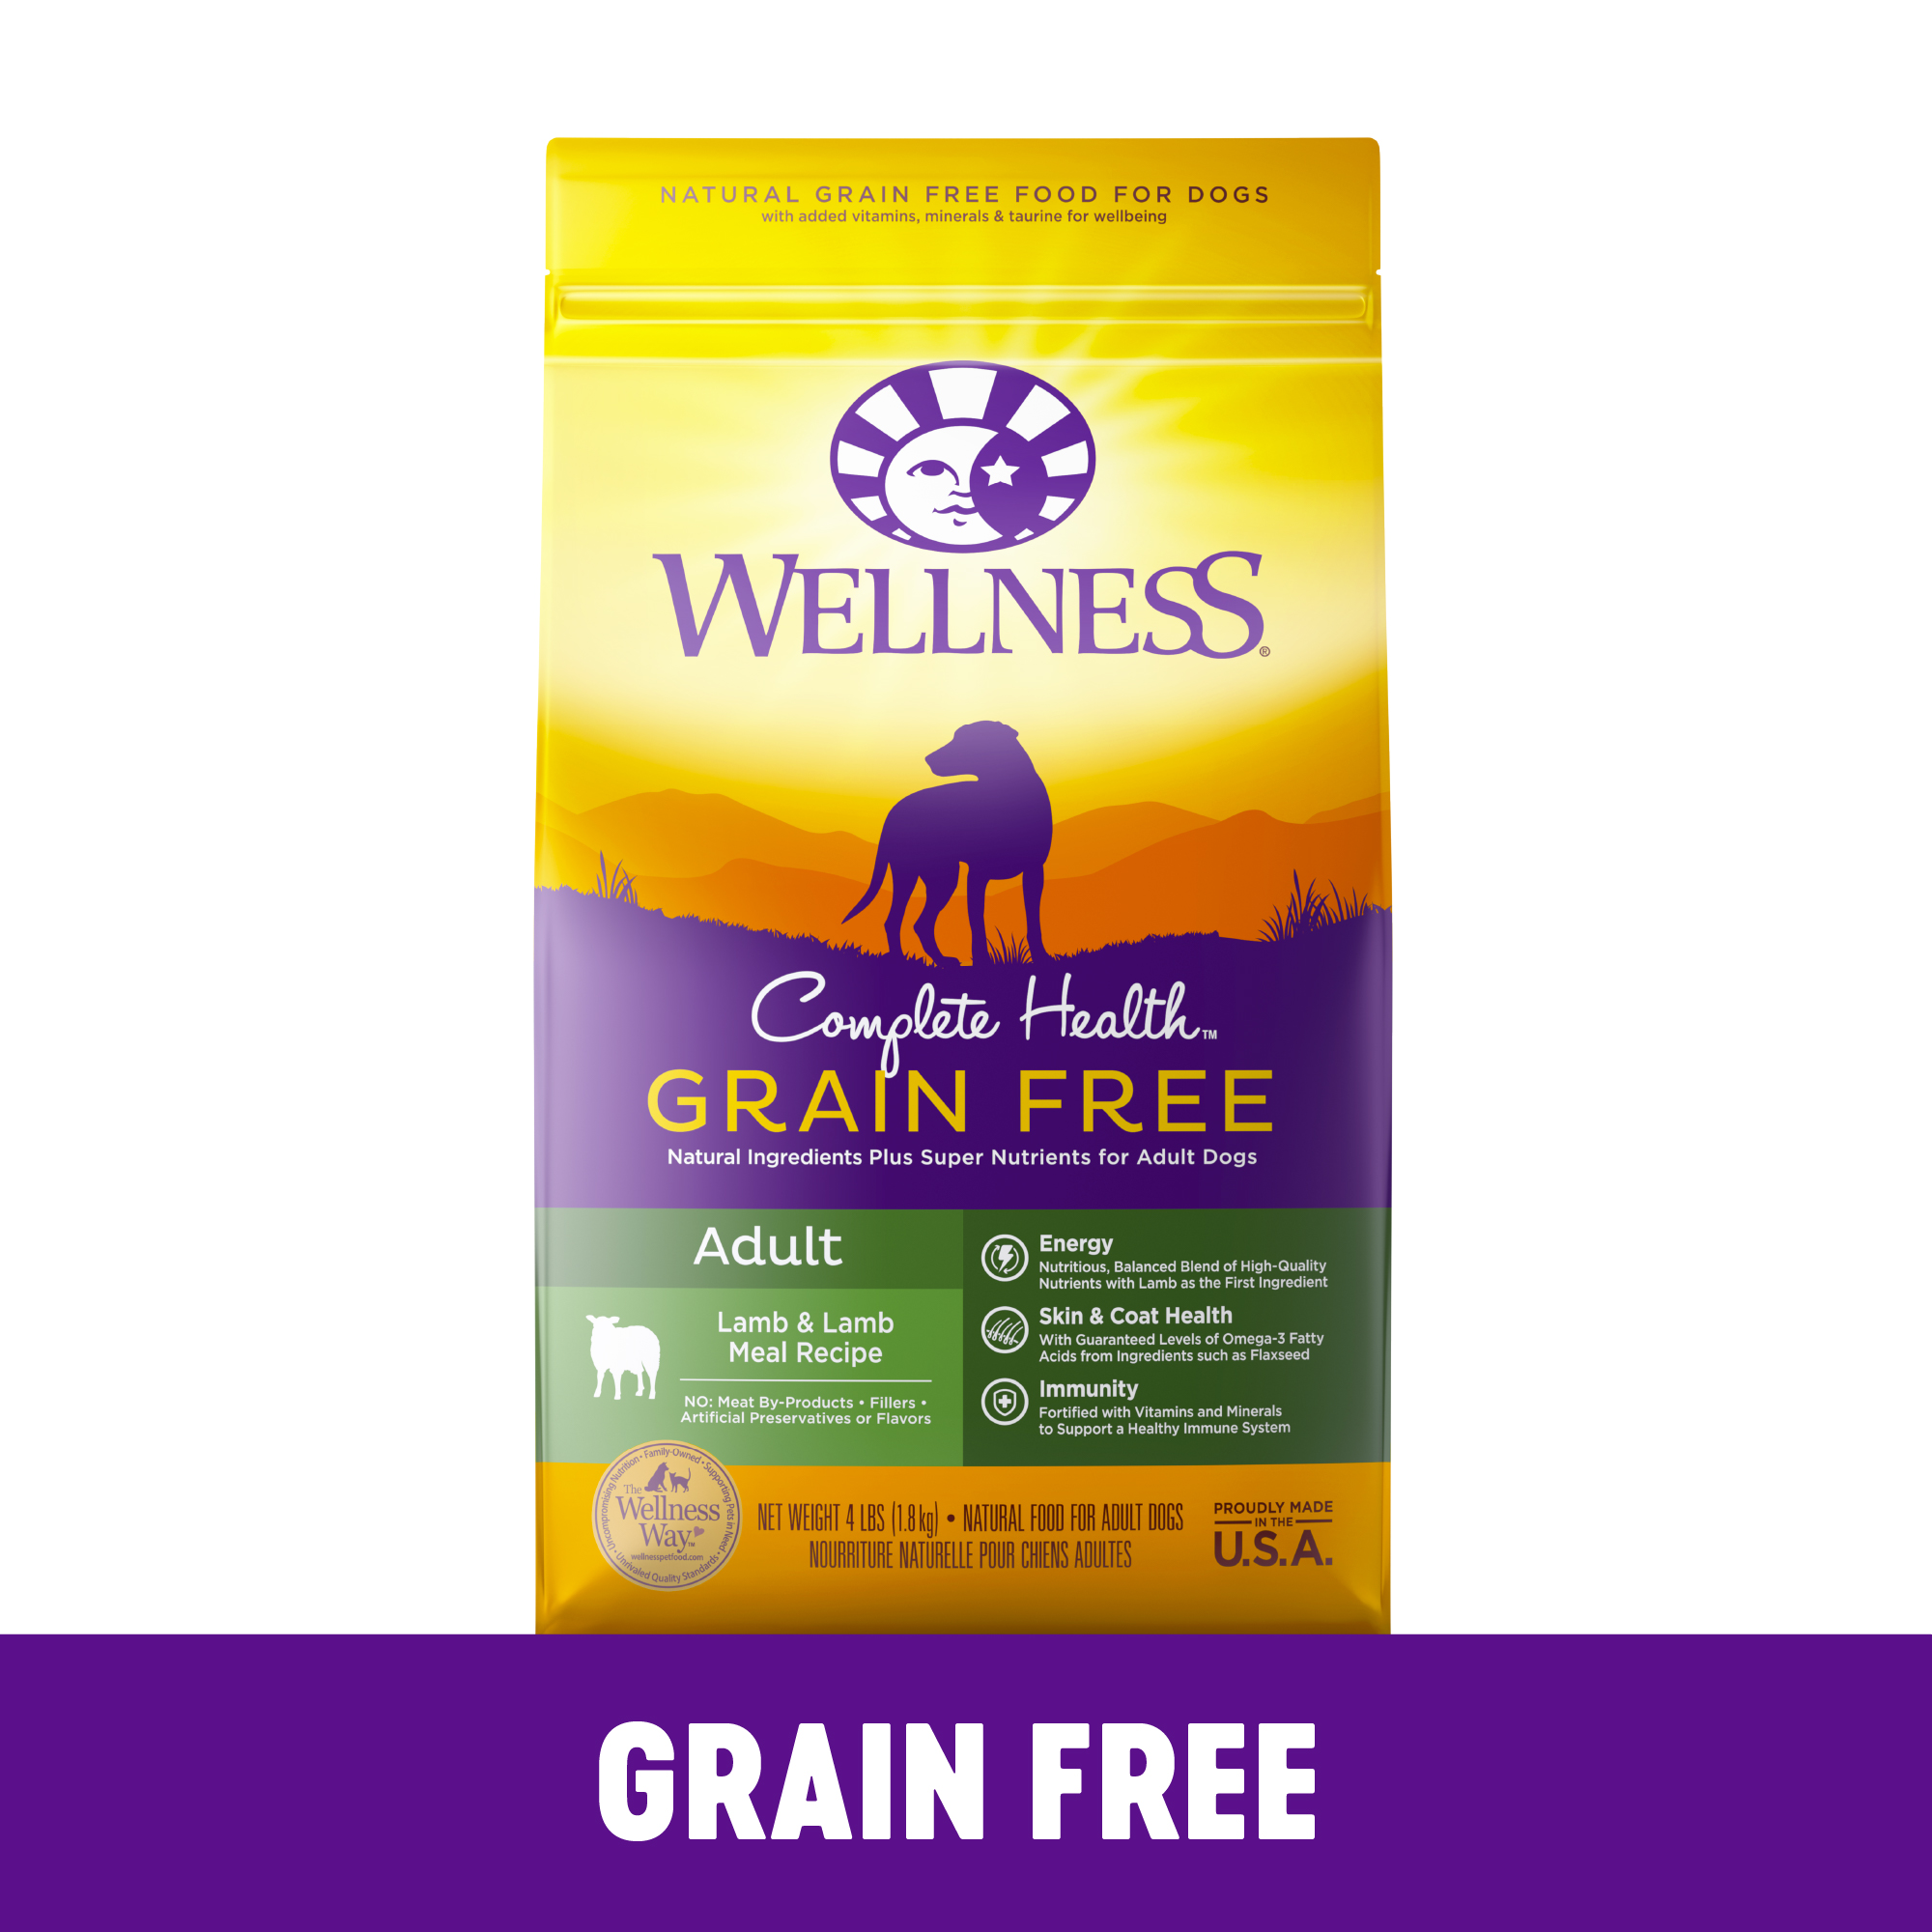 Wellness Complete Health Natural Grain Free Dry Dog Food, Lamb, 12-Pound Bag - image 1 of 7